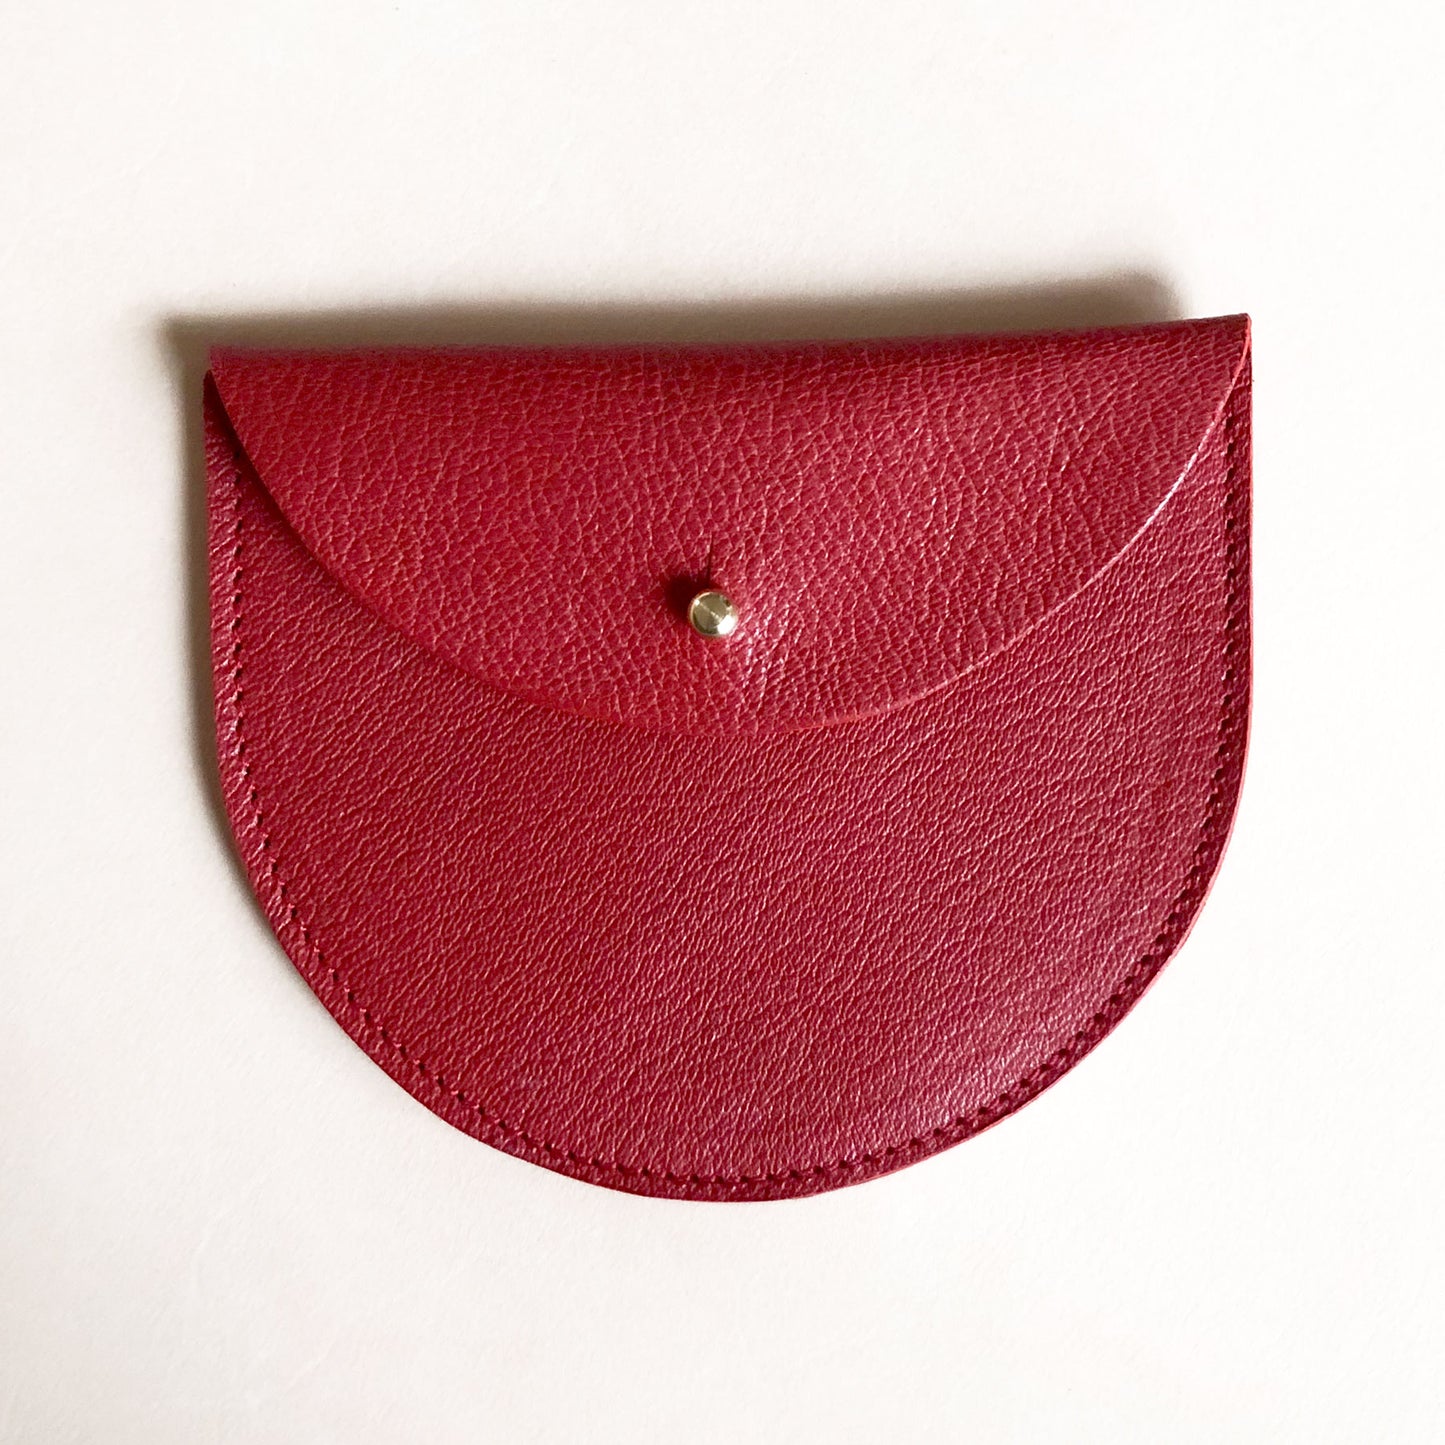 Handmade leather purse - Red